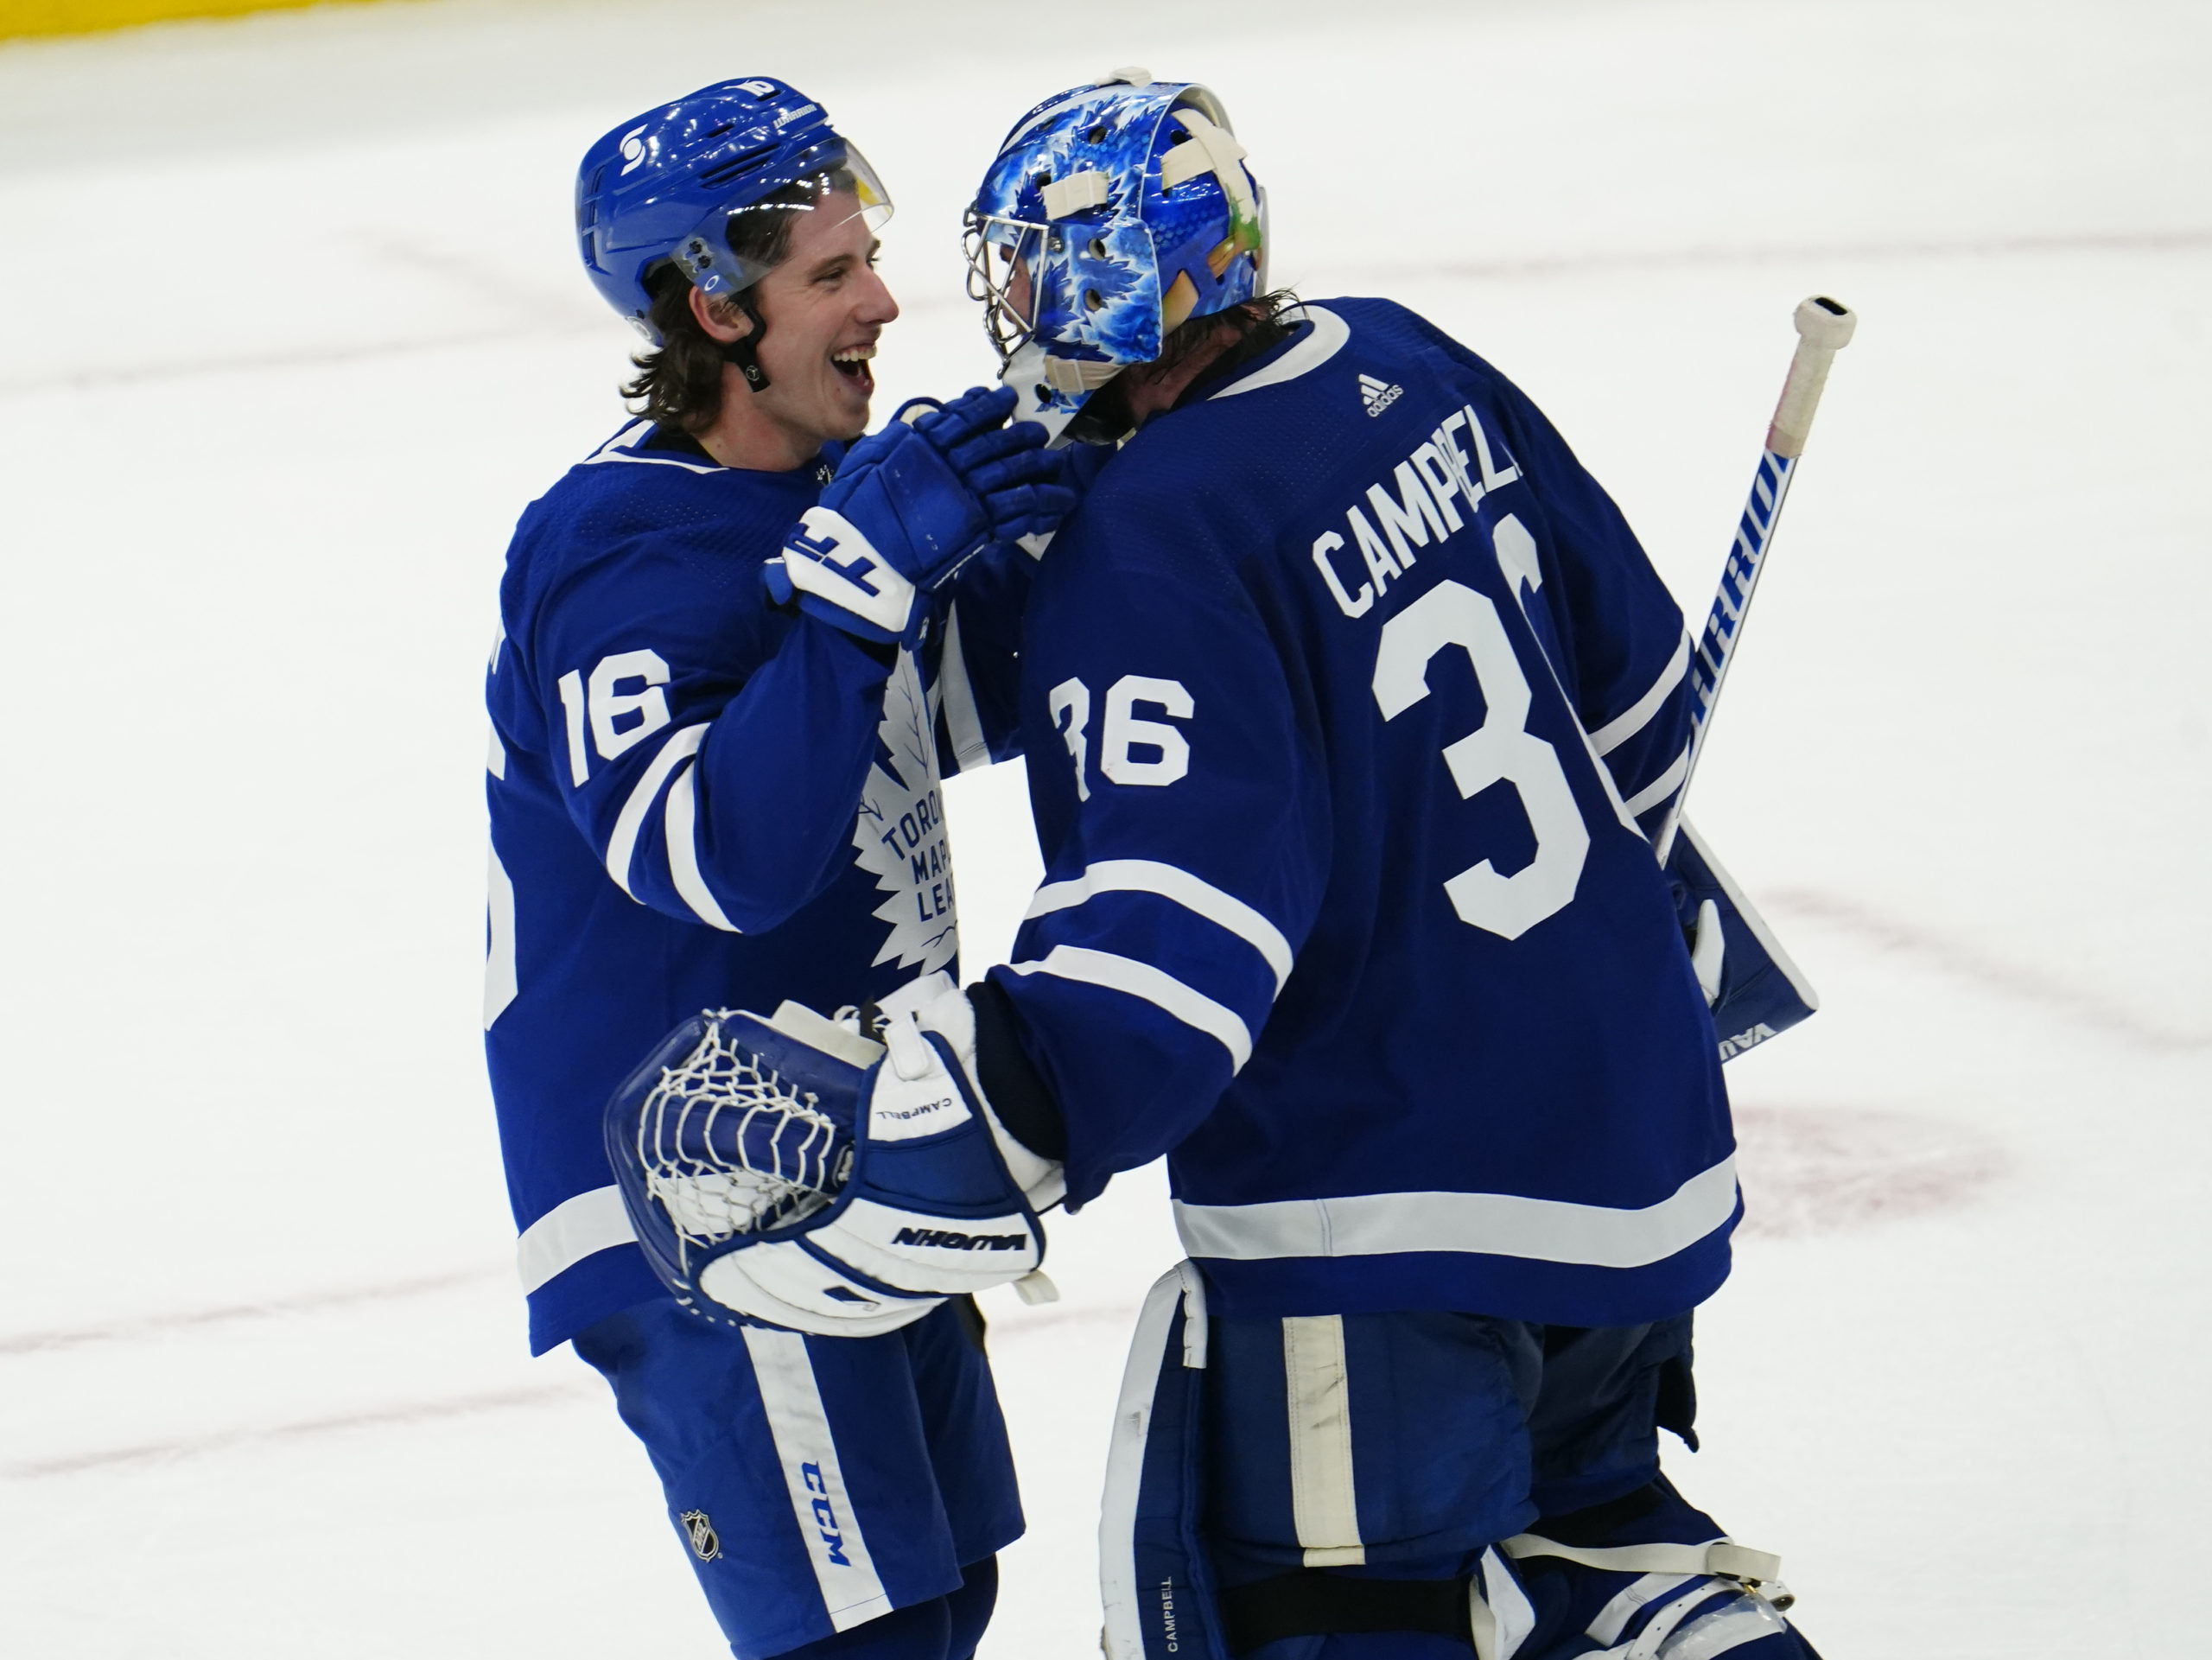 Jack Campbell & Mitch Marner, Toronto Maple Leafs